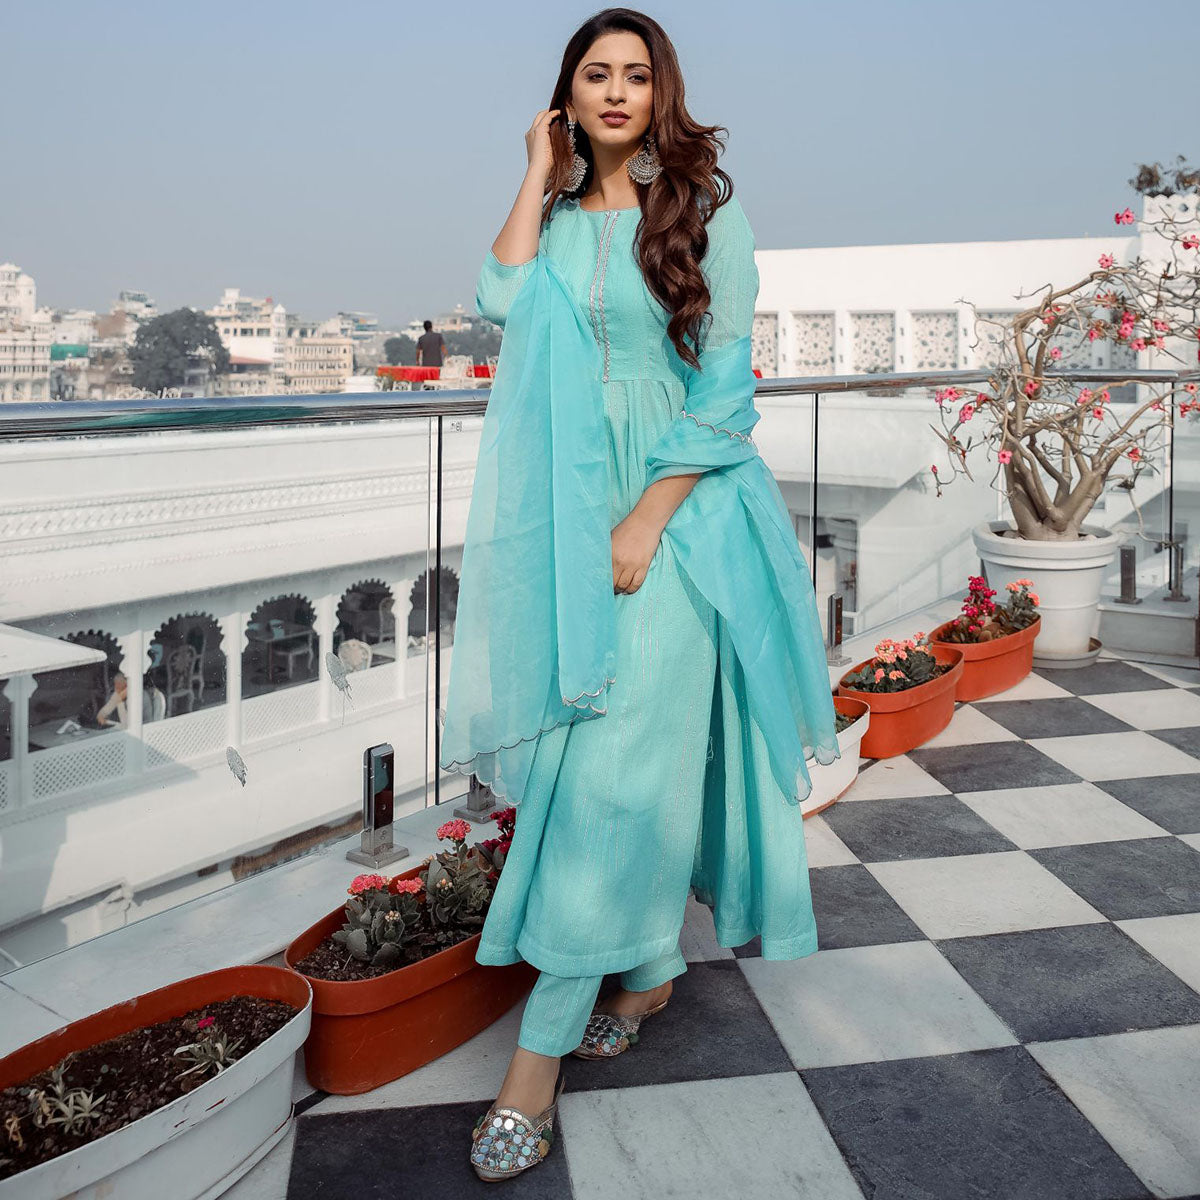 My Begum - Official Women Clothing Online Store